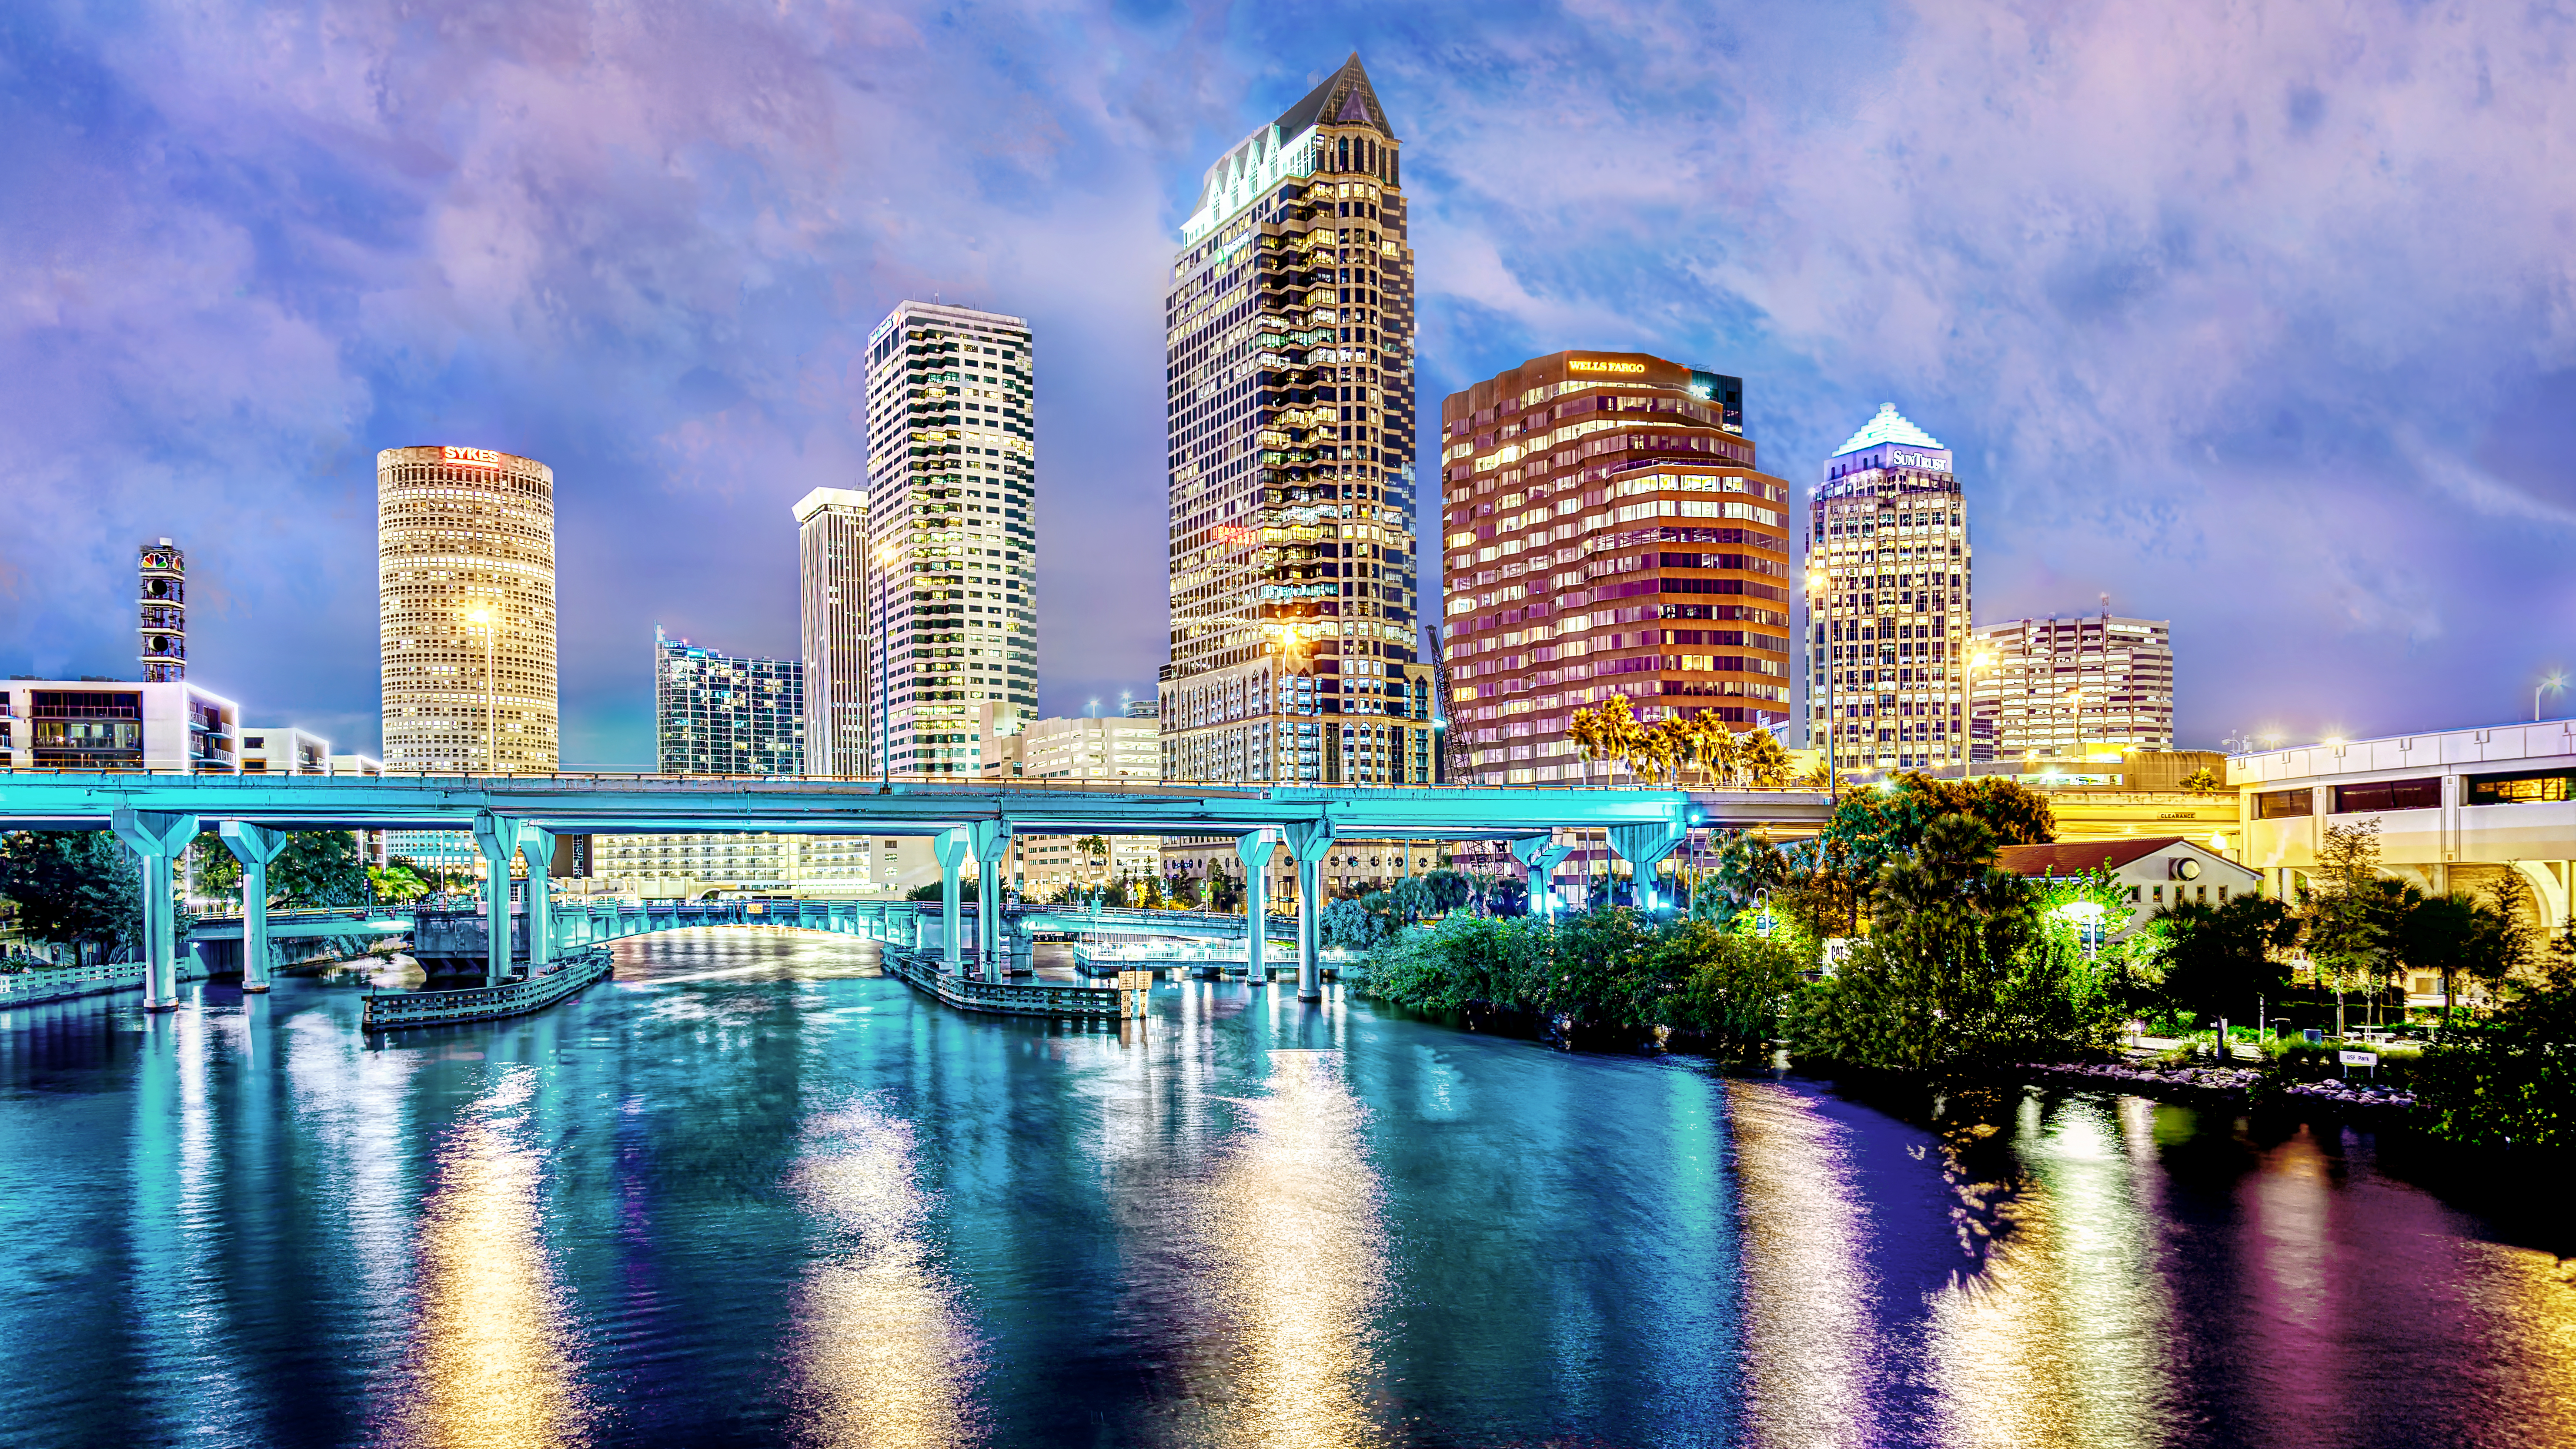 Tampa’s skyscrapers and the colour changing Brorein Bridge sparkle in the night sky